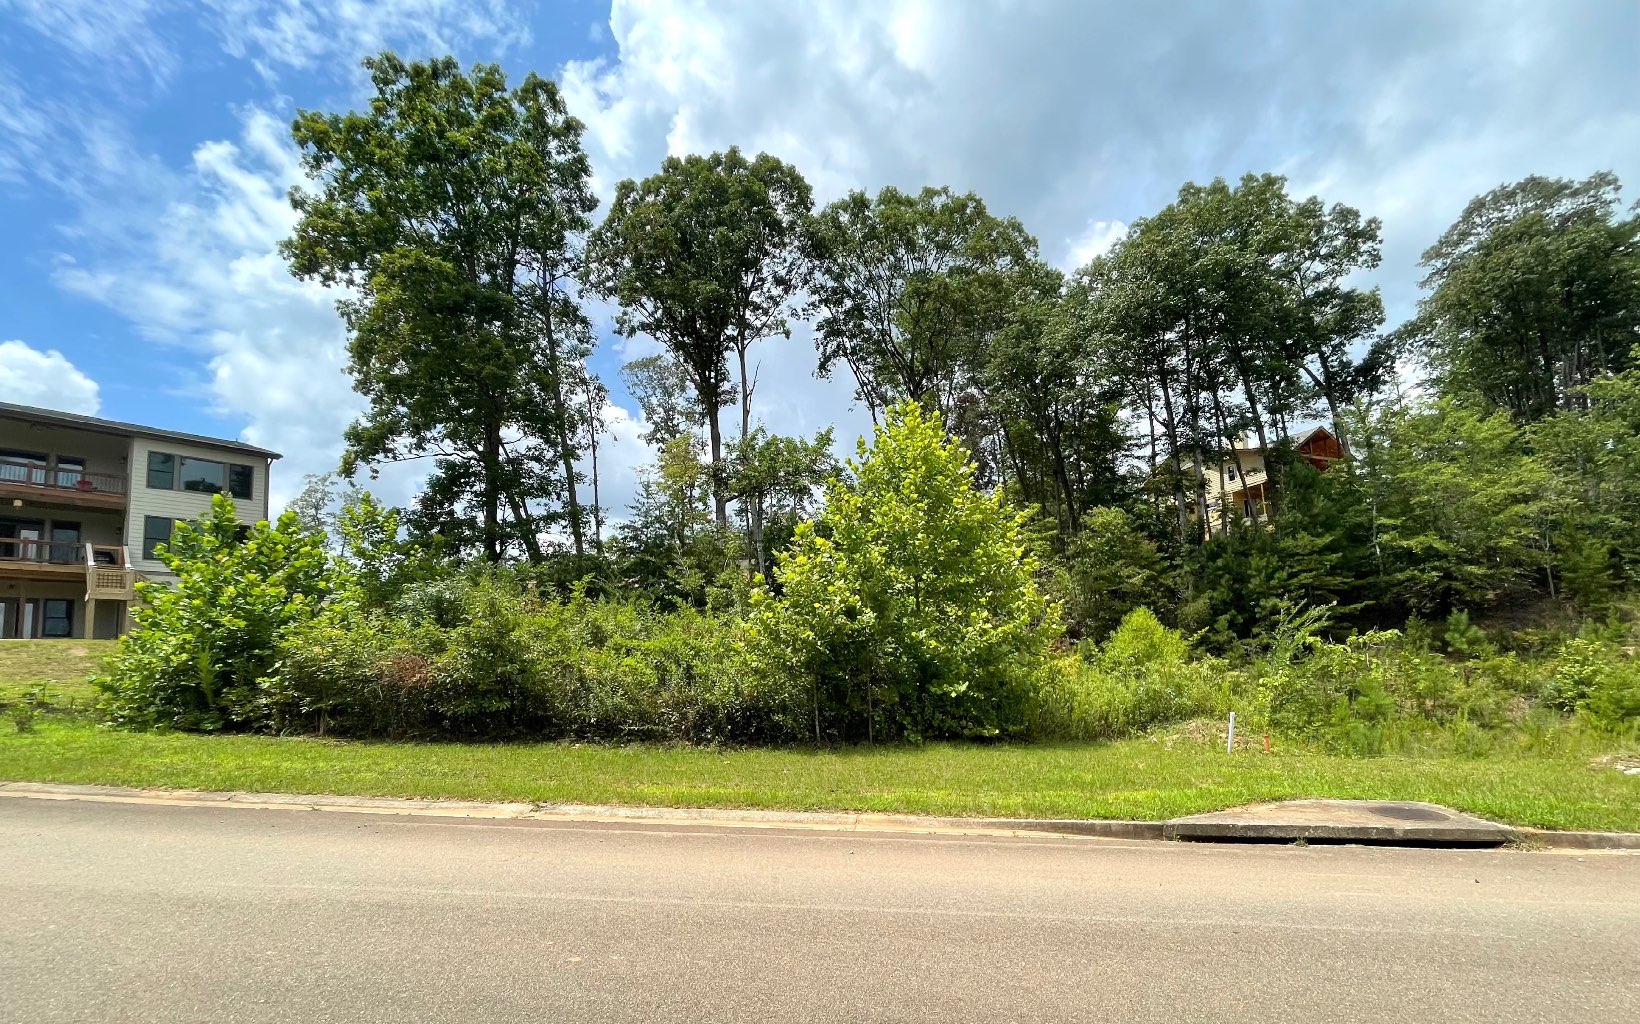 Looking for a great neighborhood to build your next home? Welcome to The Summit at Ellijay! Located within city limits just 1.5 miles from the Historic Downtown Ellijay district, this gated community has all paved roads--underground utilities including public sewer, public water, and high speed internet. This lot will have gorgeous year-round views once trees are cleared from the building site. Bring your builder or we can recommend one! Short term rentals are allowed in this community. You will be hard pressed to find a more convenient location to build your dream home! Additional lots available if you are looking for more acreage.